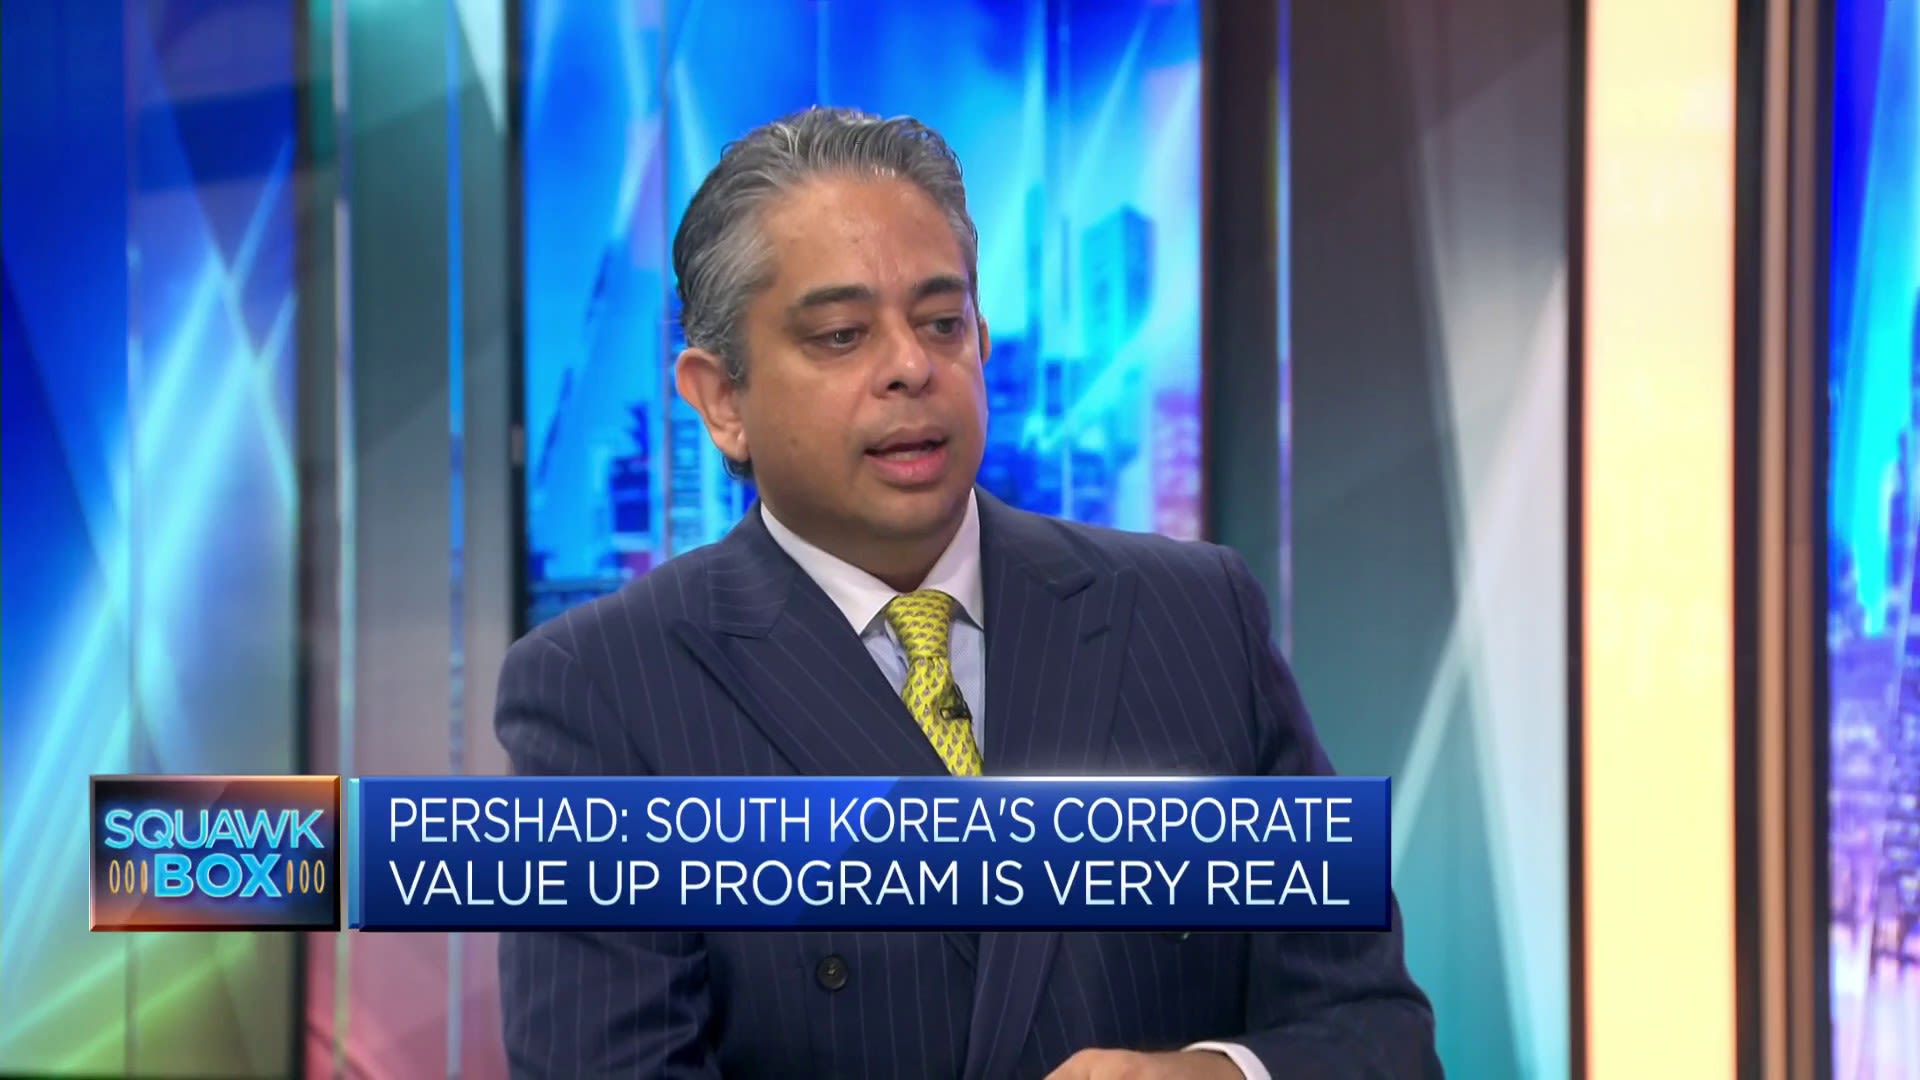 Fund manager discusses South Korea